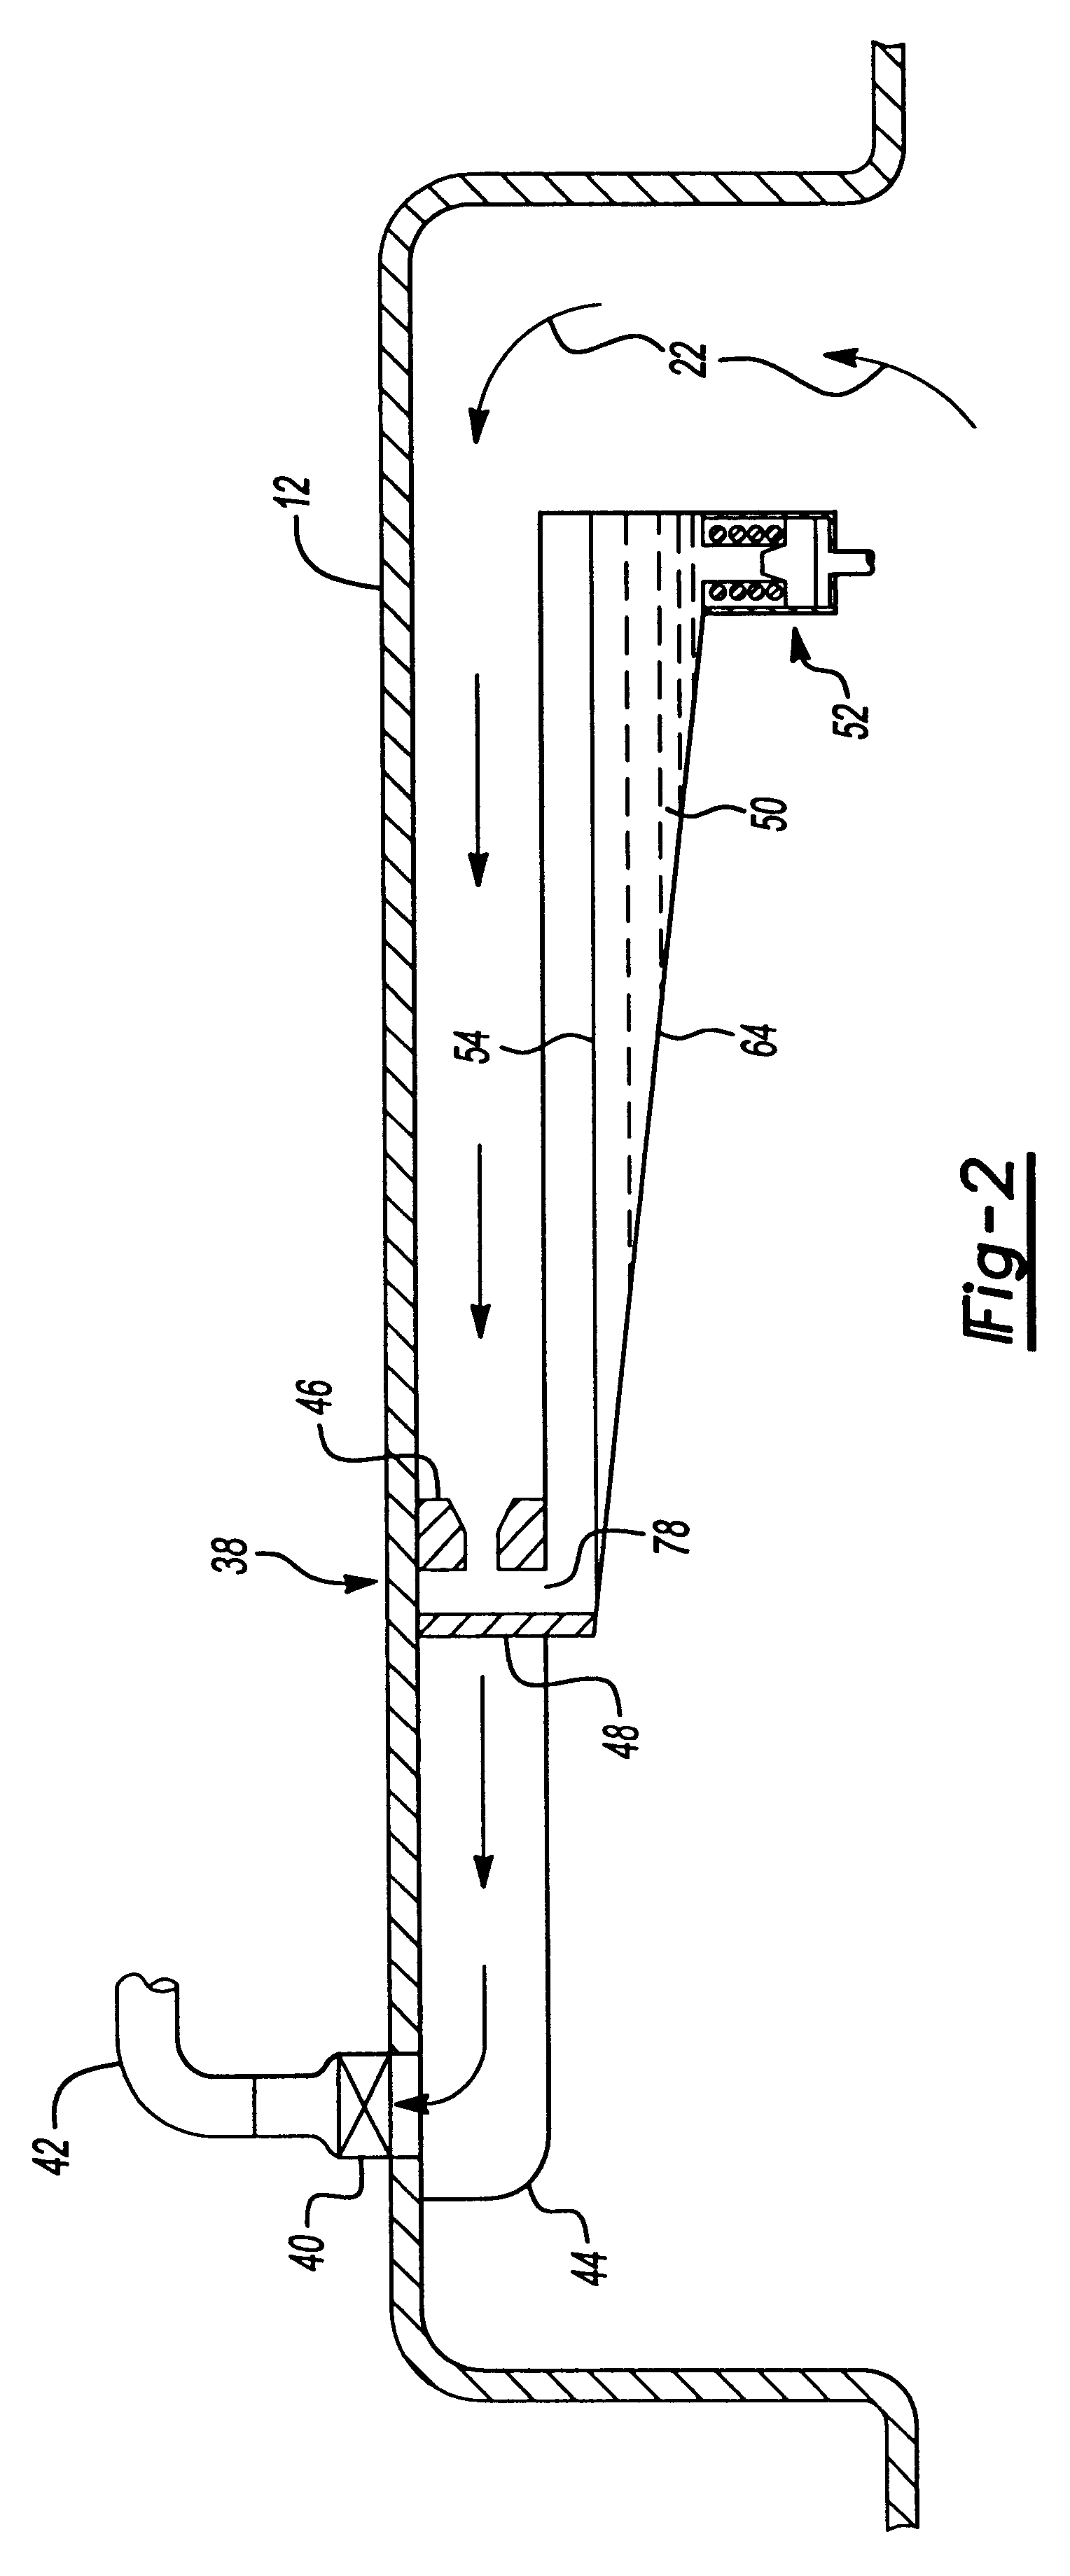 Crankcase bypass system with oil scavenging device